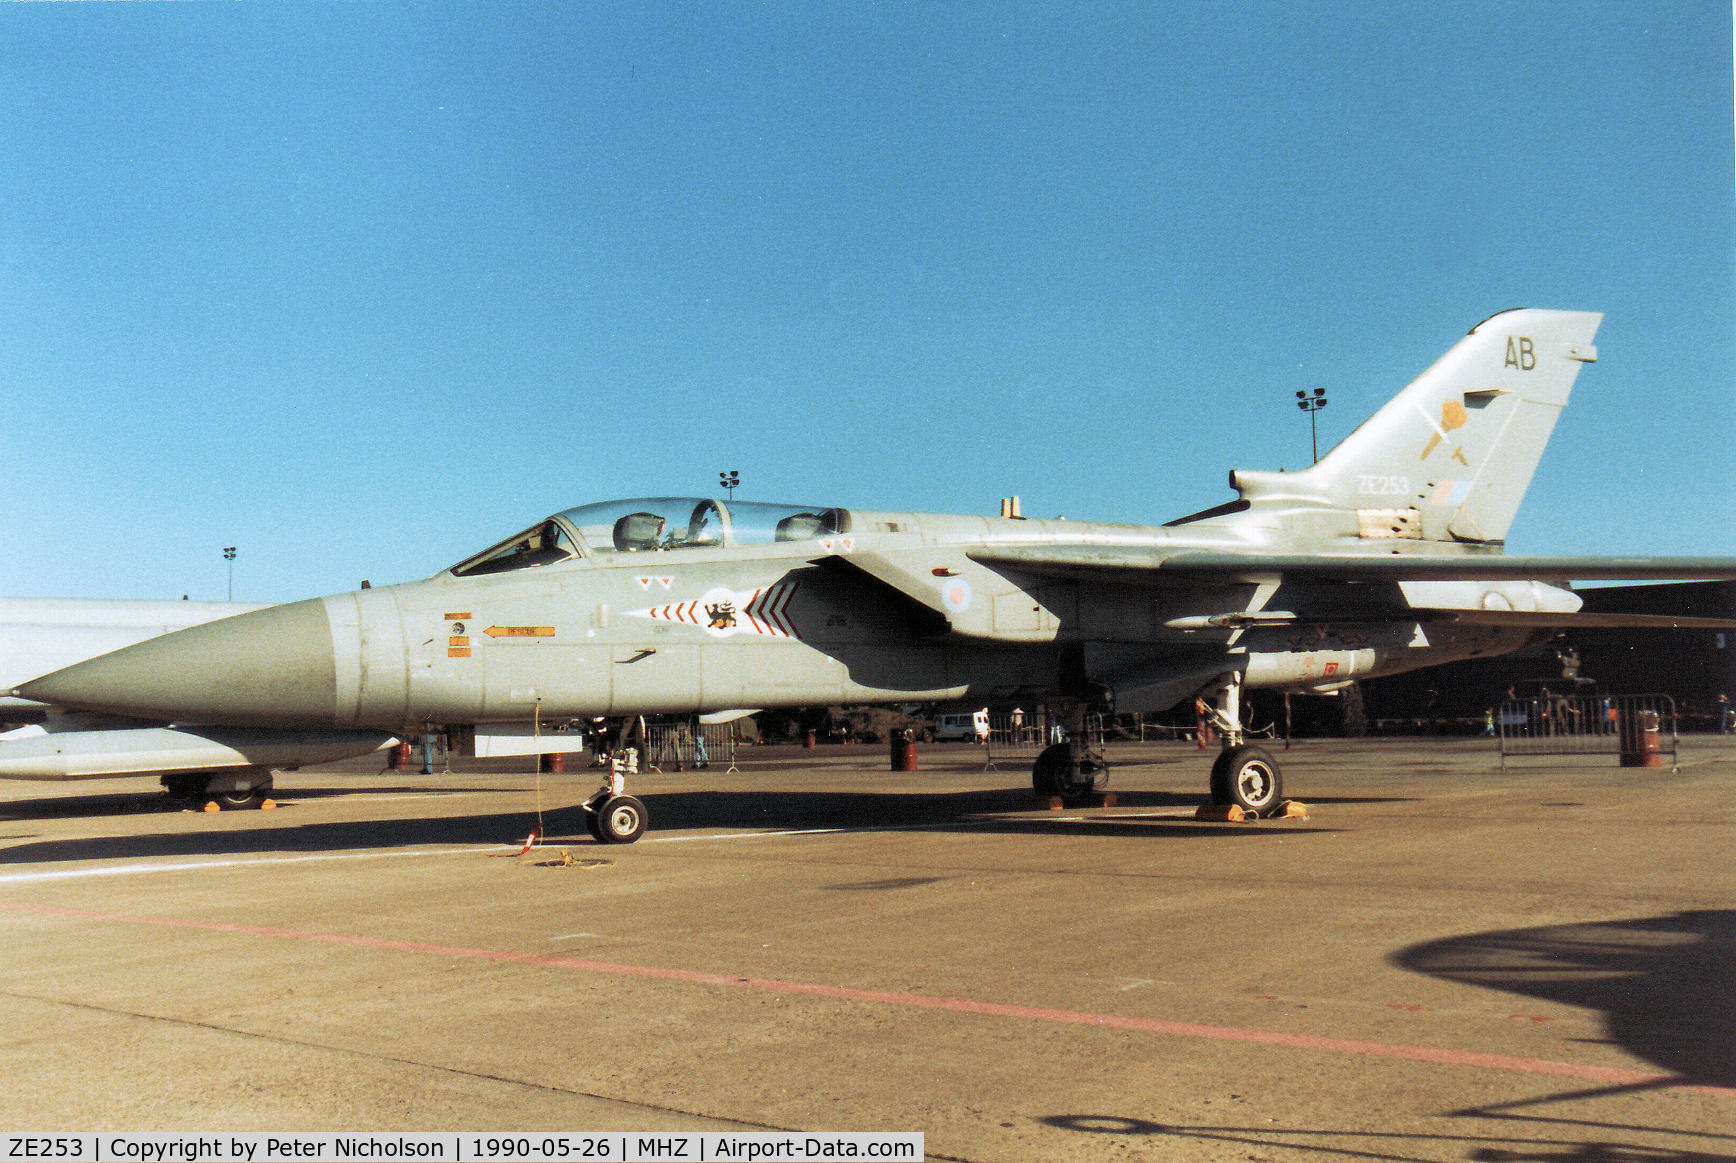 ZE253, 1987 Panavia Tornado F.3 C/N AT019/600/3268, Tornado F.3 of RAF Coningsby's 229 Operational Conversion Unit on display at the 1990 RAF Mildenhall Air Fete.